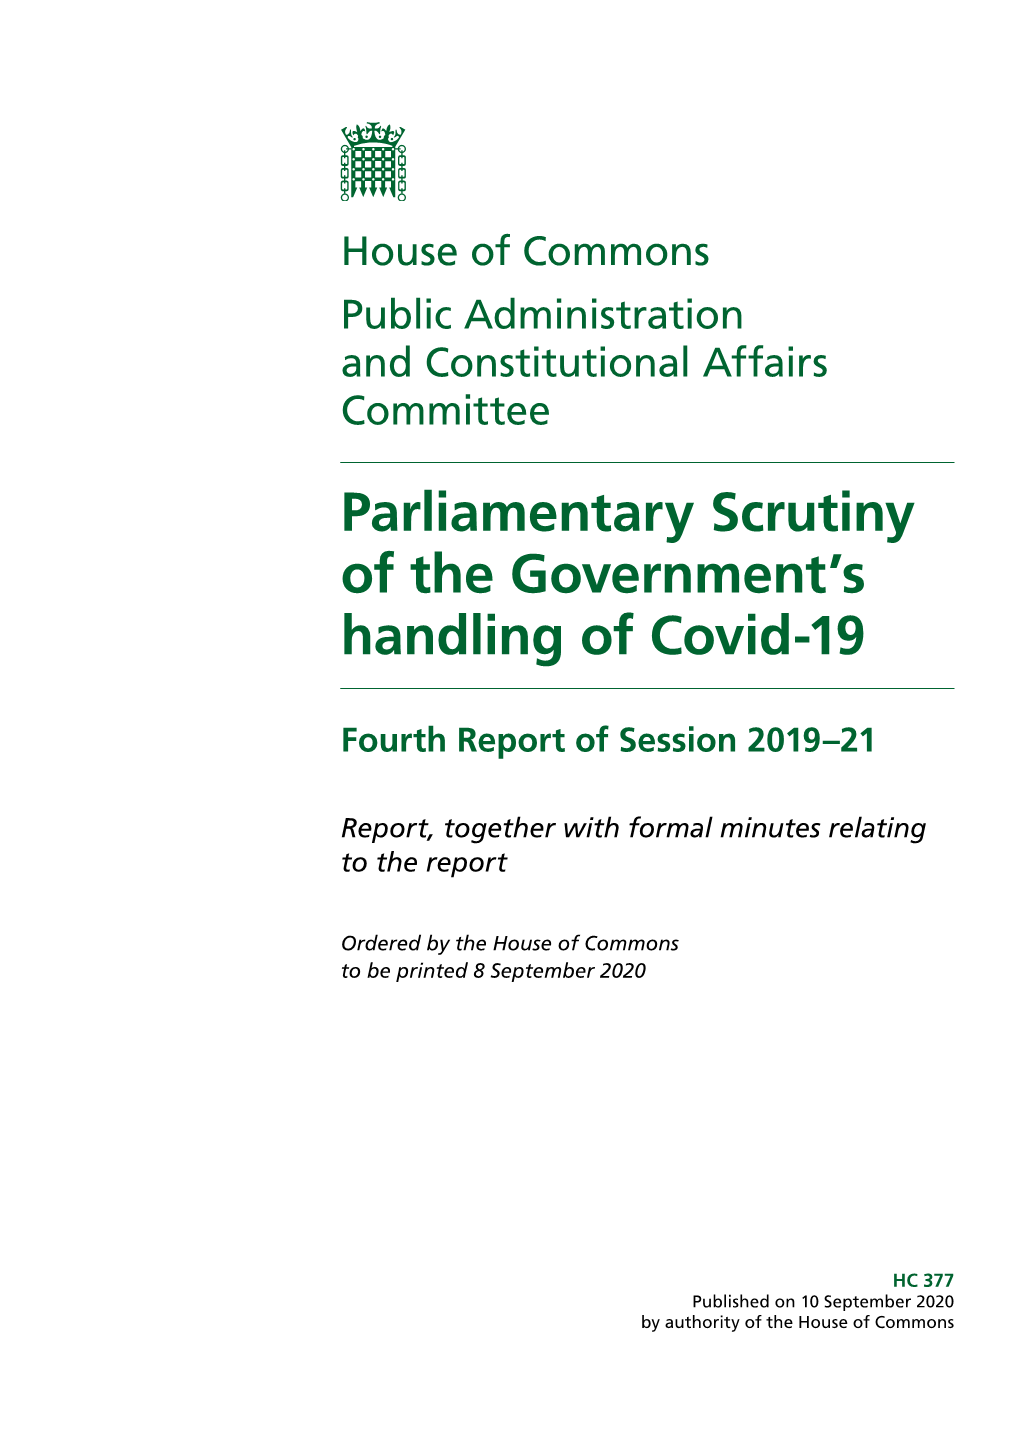 Parliamentary Scrutiny of the Government's Handling of Covid-19